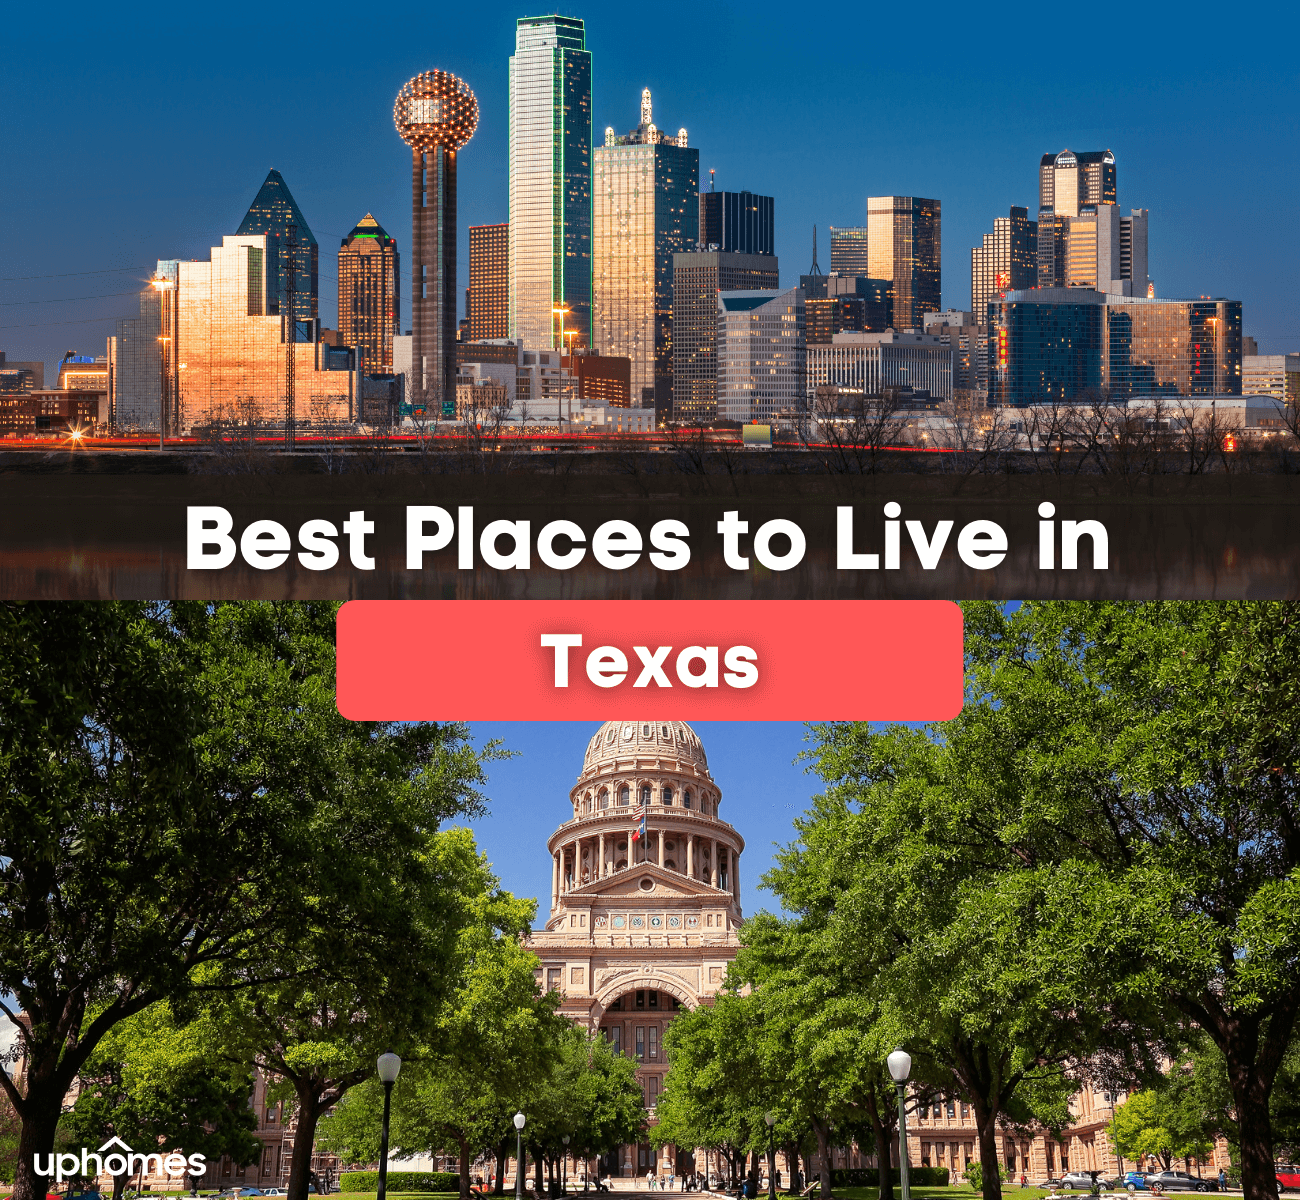 Best Place to Live in Texas - What are the best cities to live in the state of Texas?